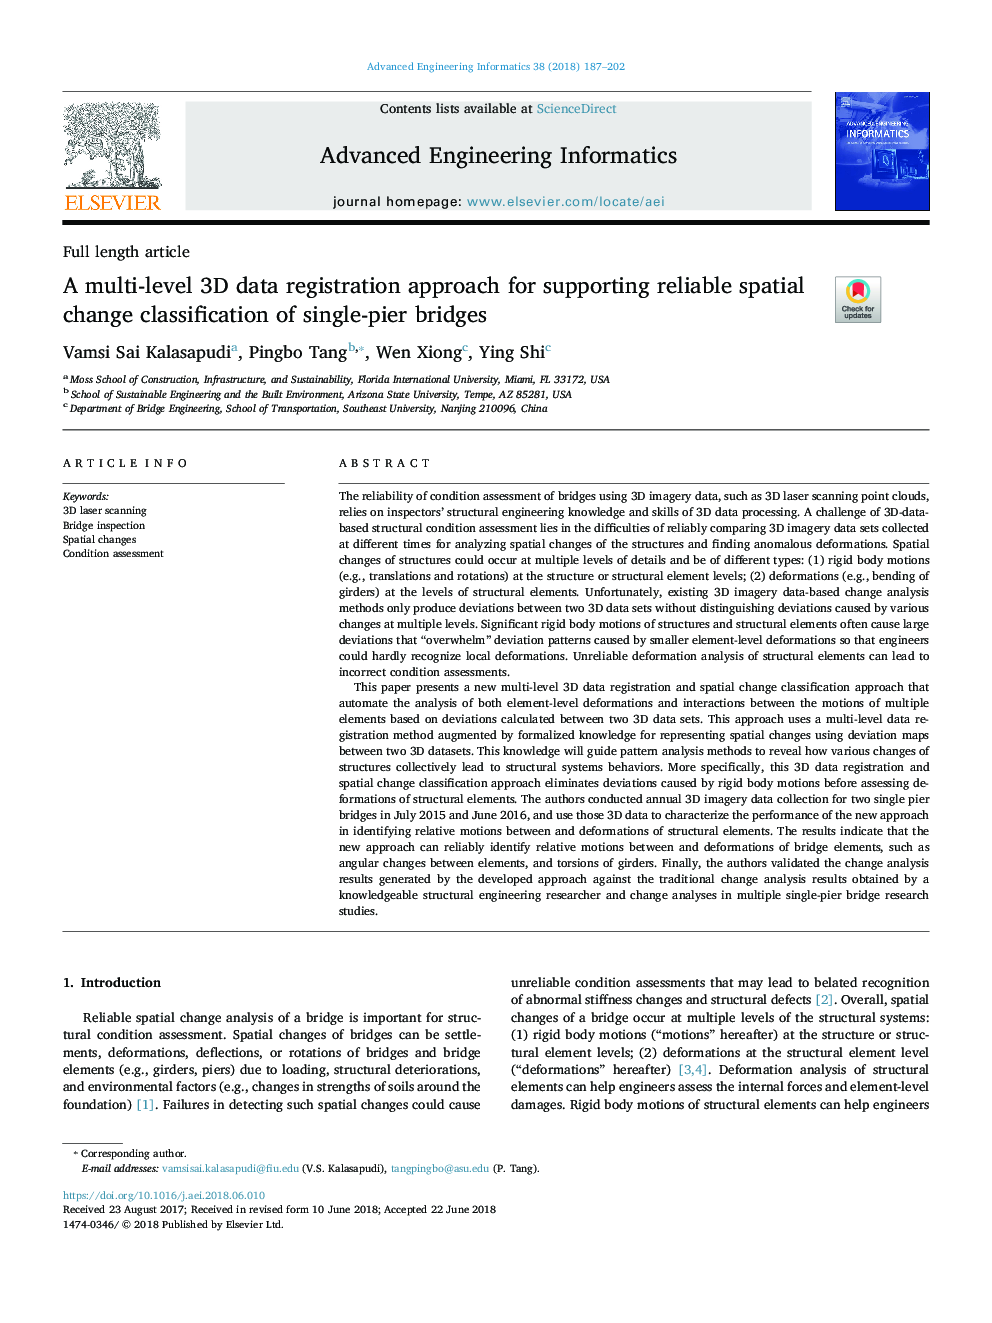 A multi-level 3D data registration approach for supporting reliable spatial change classification of single-pier bridges